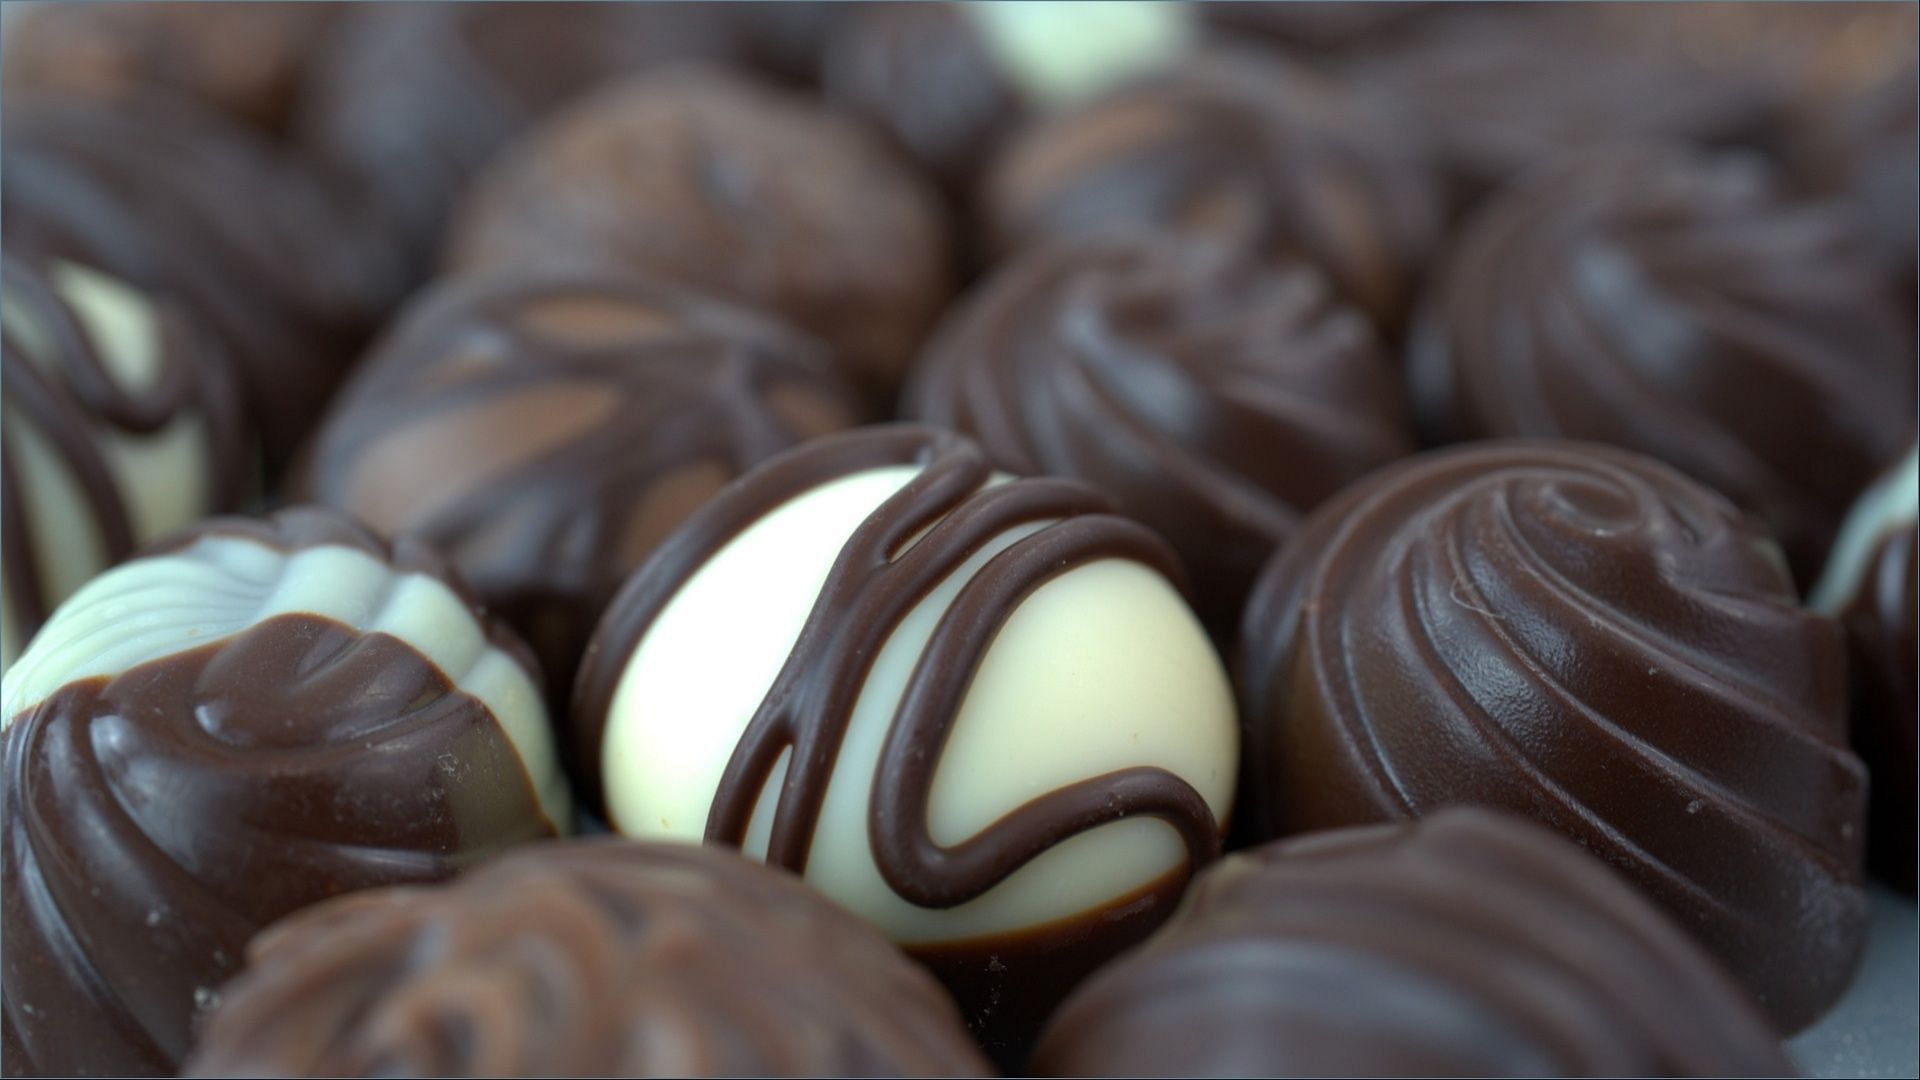 Moser Roth St. Patrick&#039;s Day Assorted Chocolate Truffles are priced at $2.99 (Image via Webandi / Pixabay)